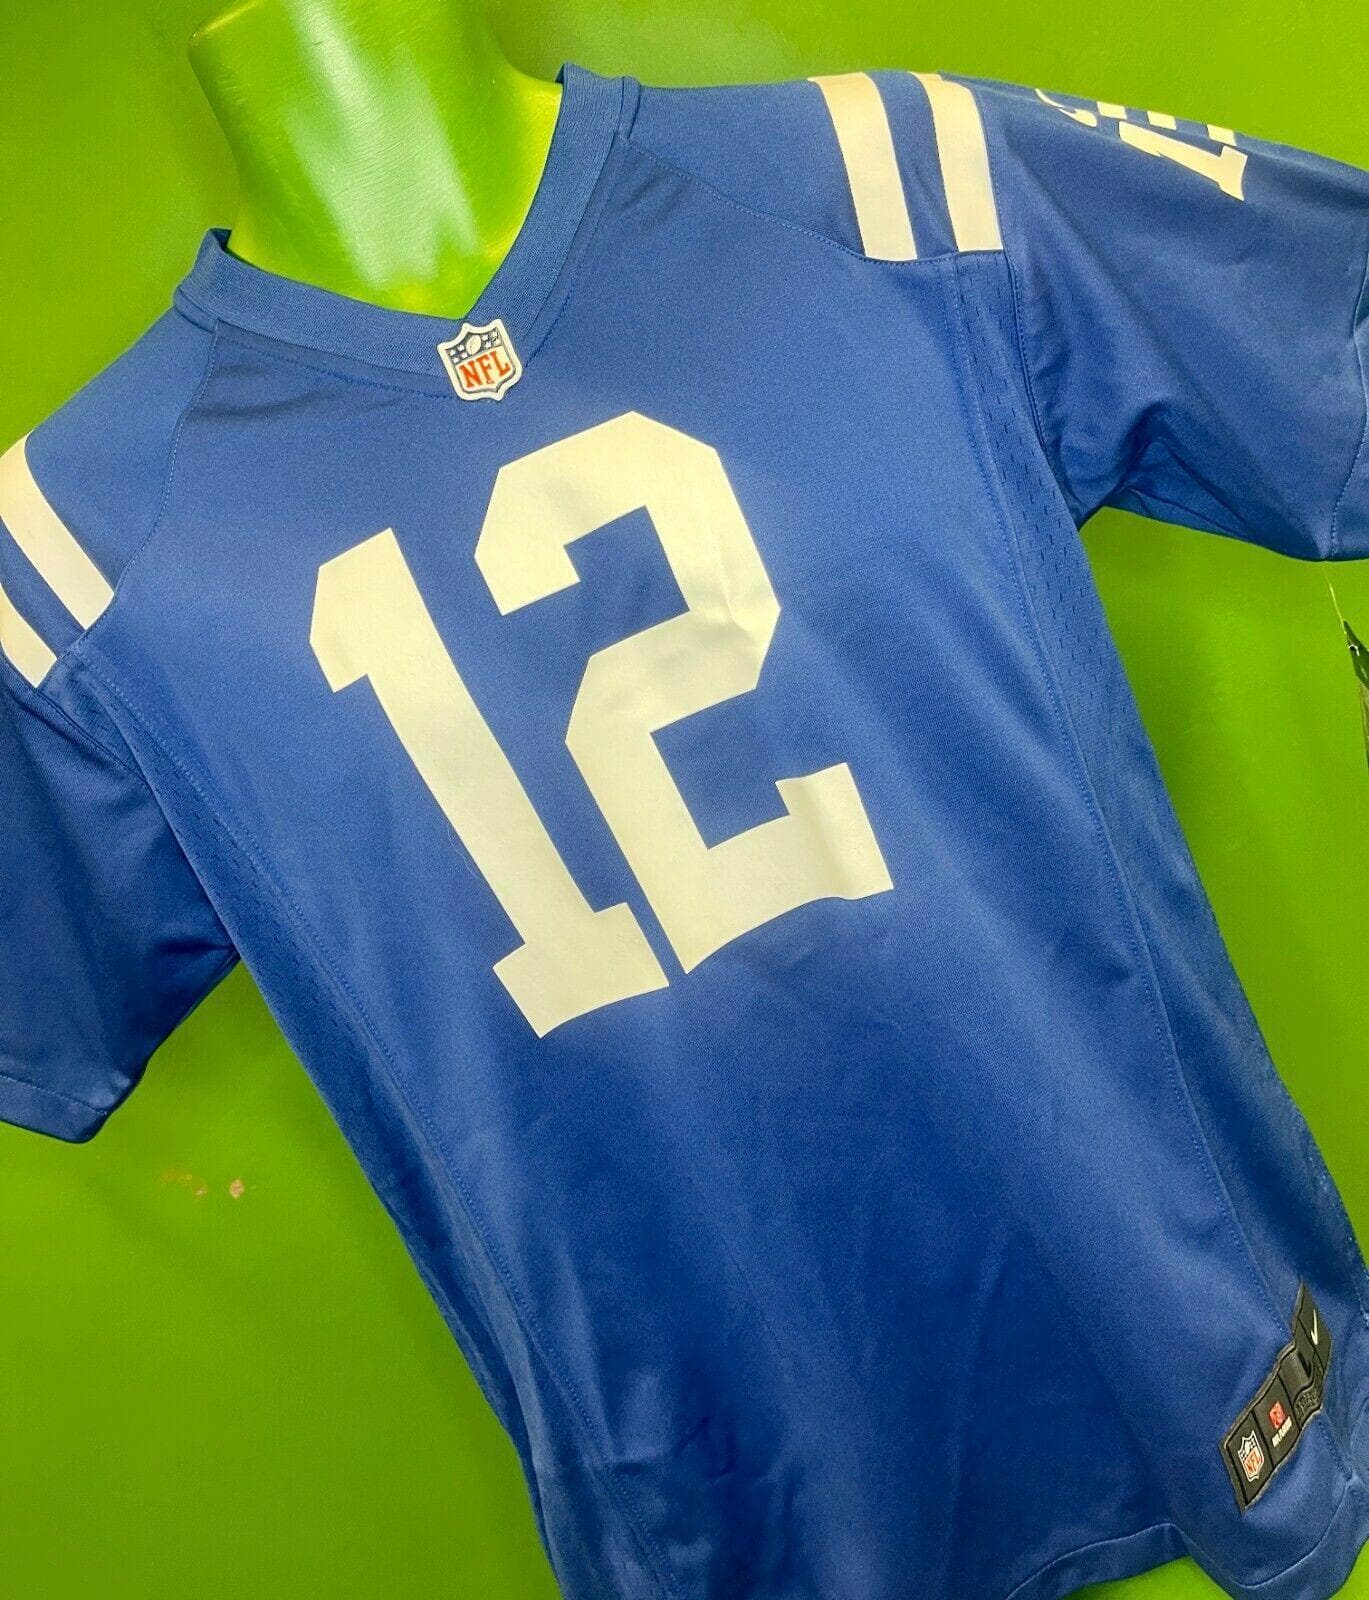 NFL Indianapolis Colts Luck #12 Game Jersey Youth Large 14-16 NWT